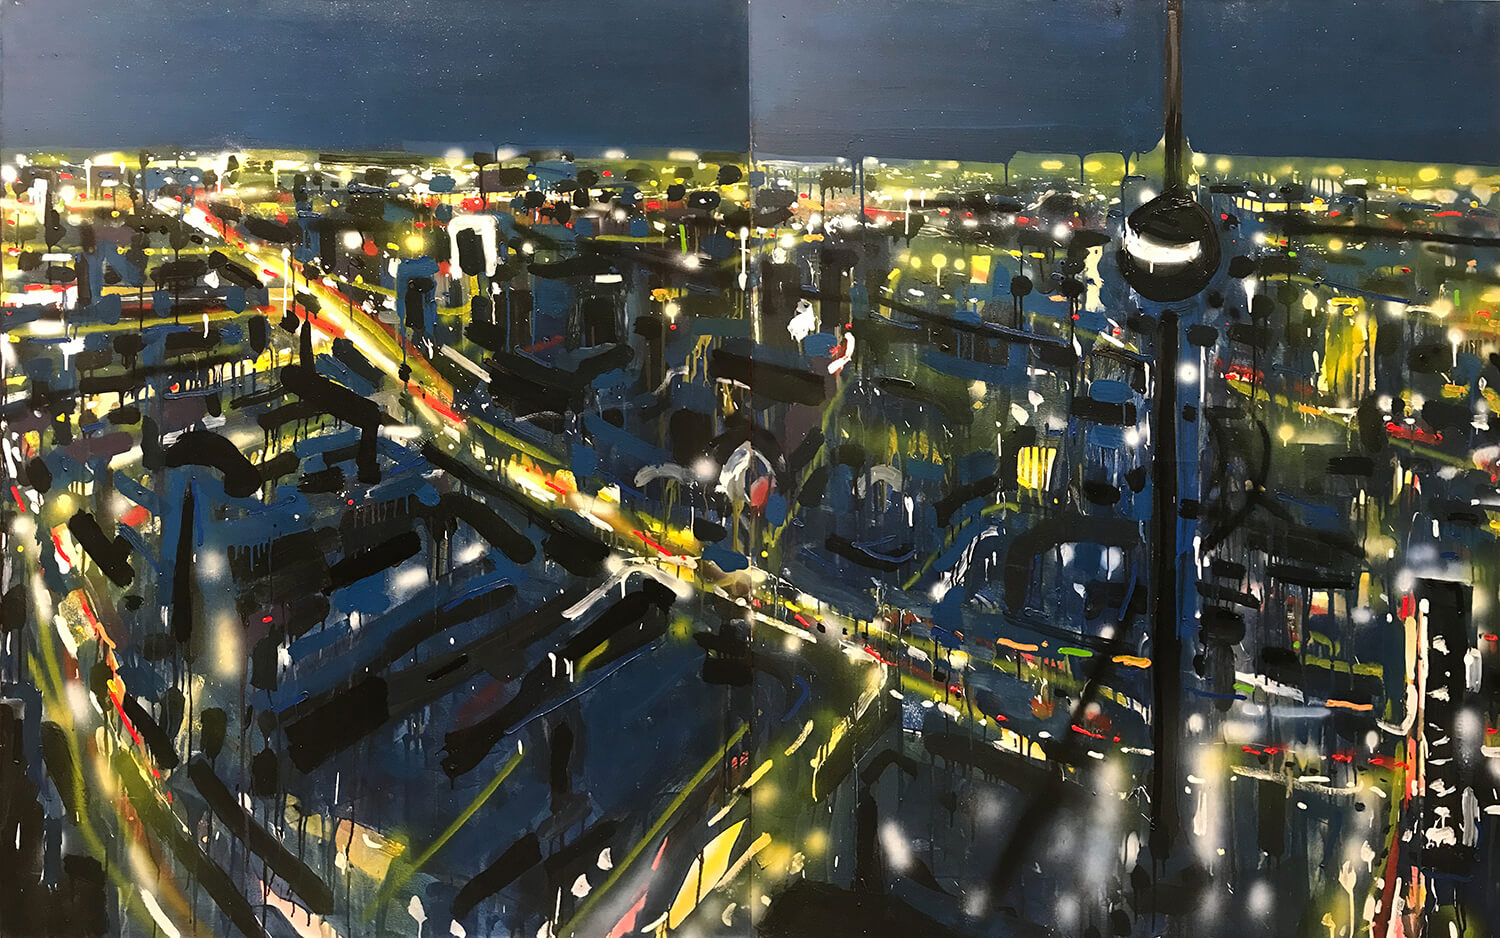 Franziskus Wendels, Berlin Flyover, 1996/1997, mixed media on canvas, 150 x 240 cm, in two parts